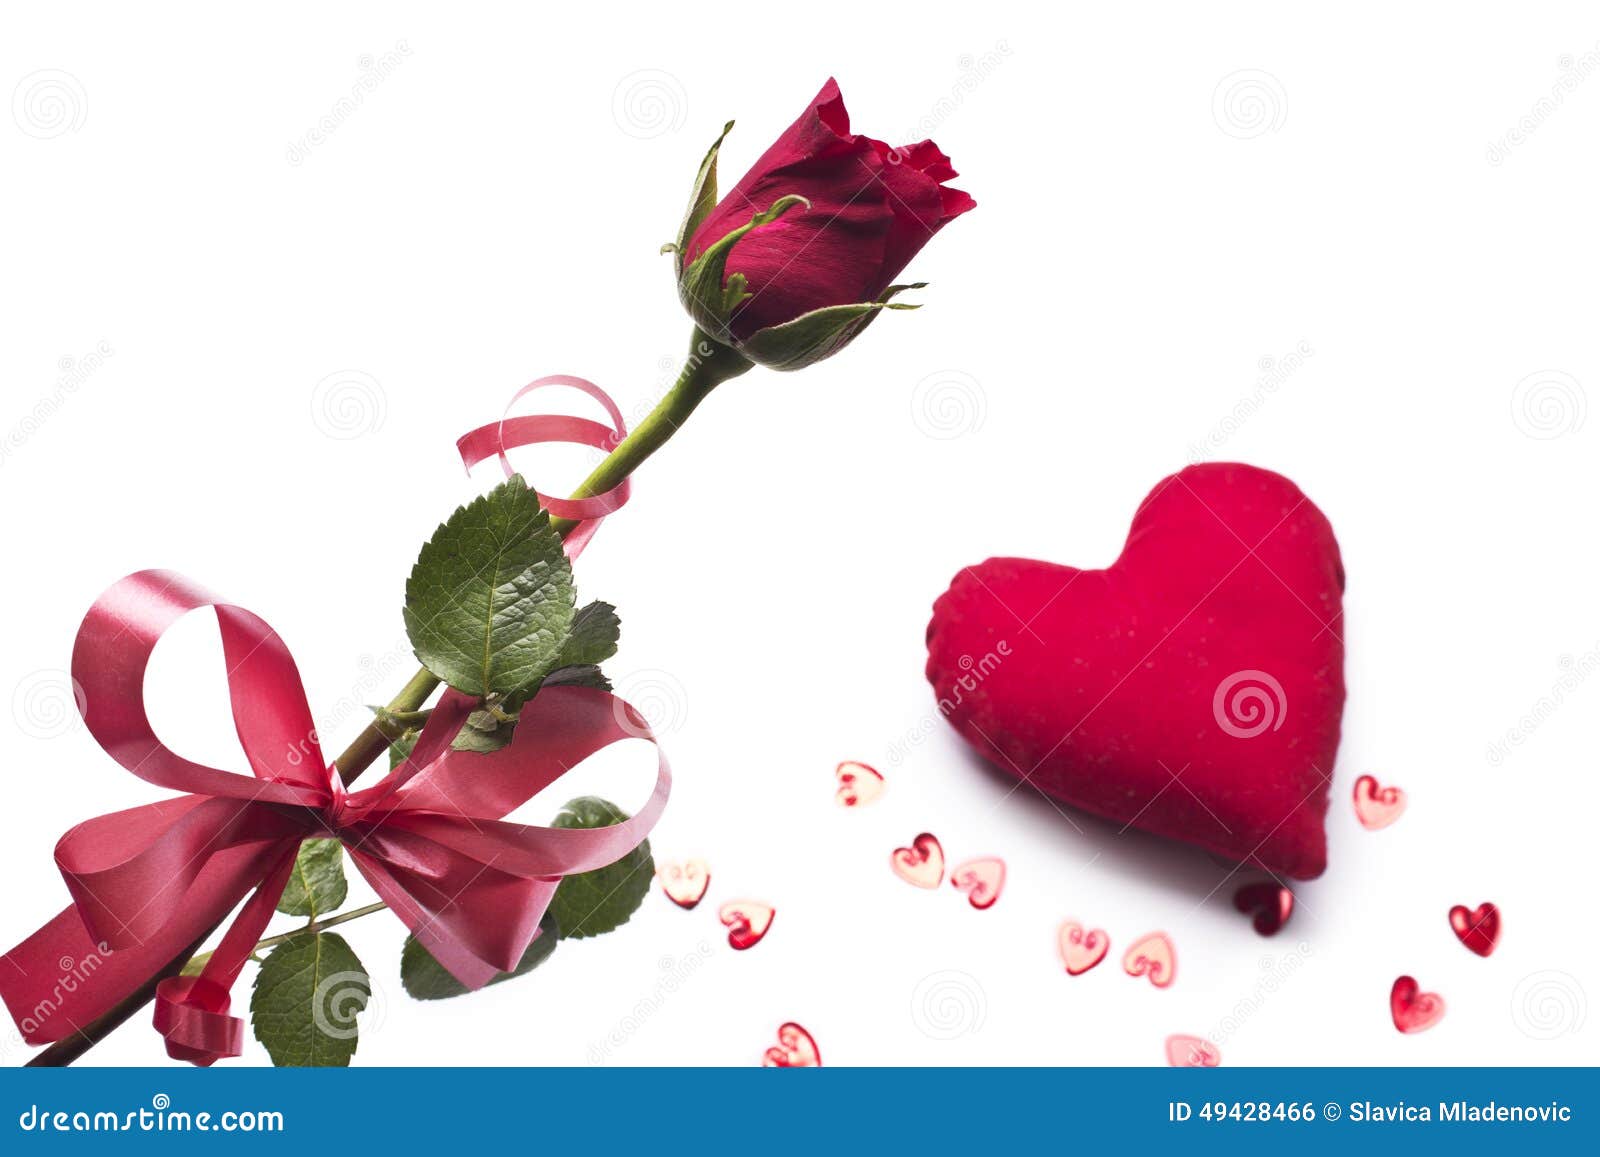 love red rose heart white background 49428466